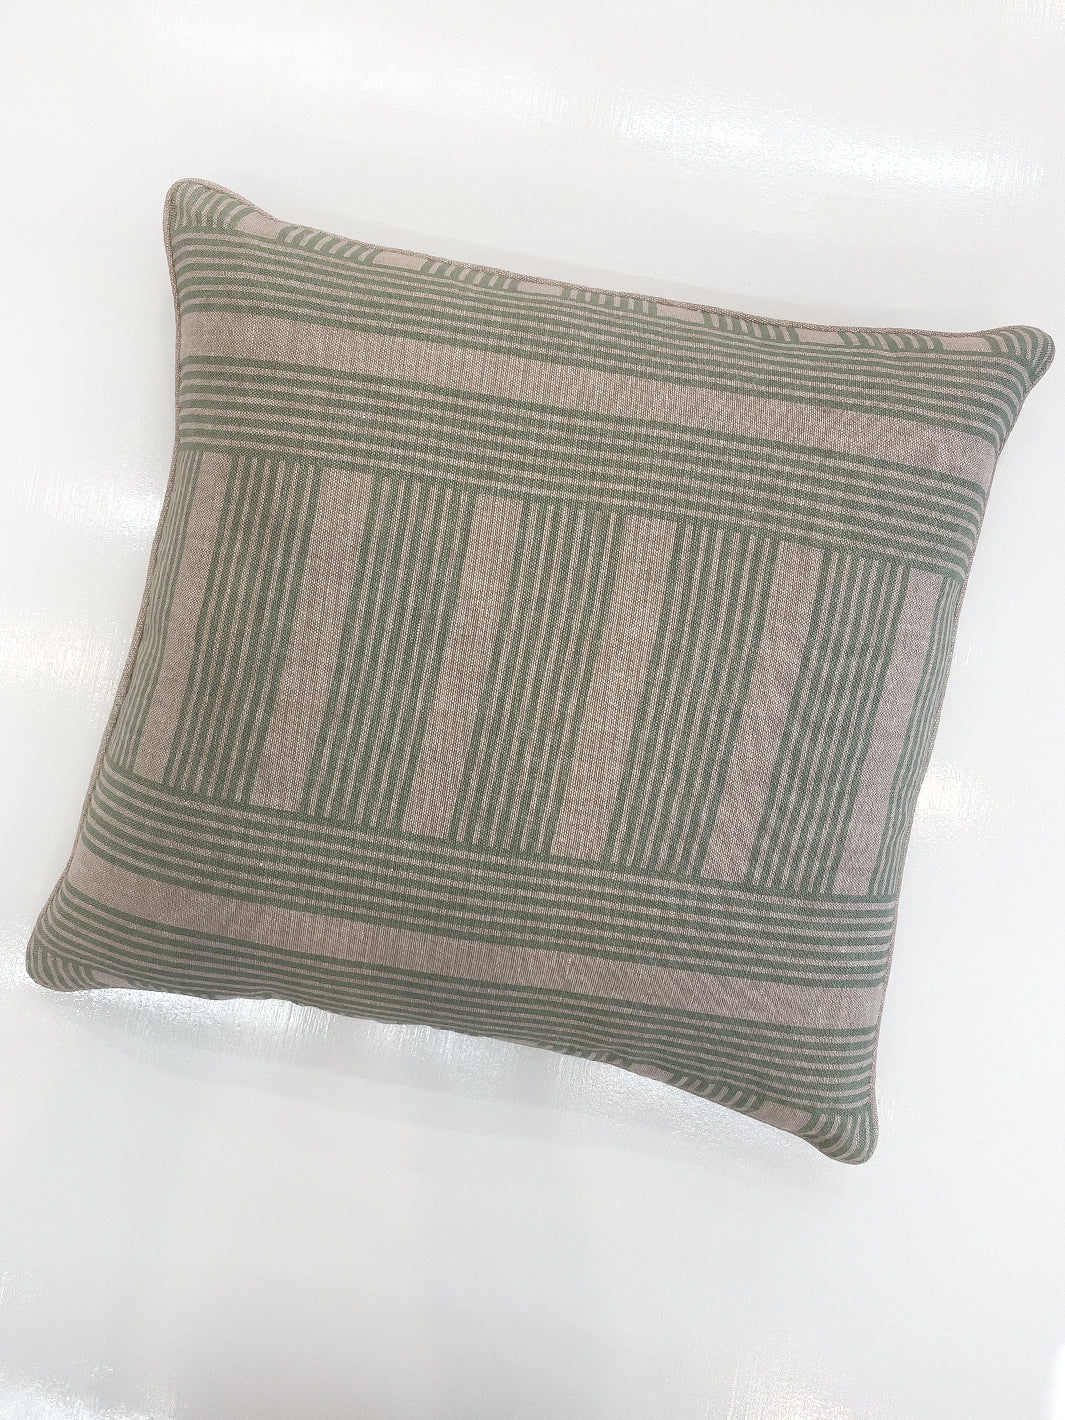 'Roman Holiday Grid' Throw Pillow by Barbie™ - Spring Green